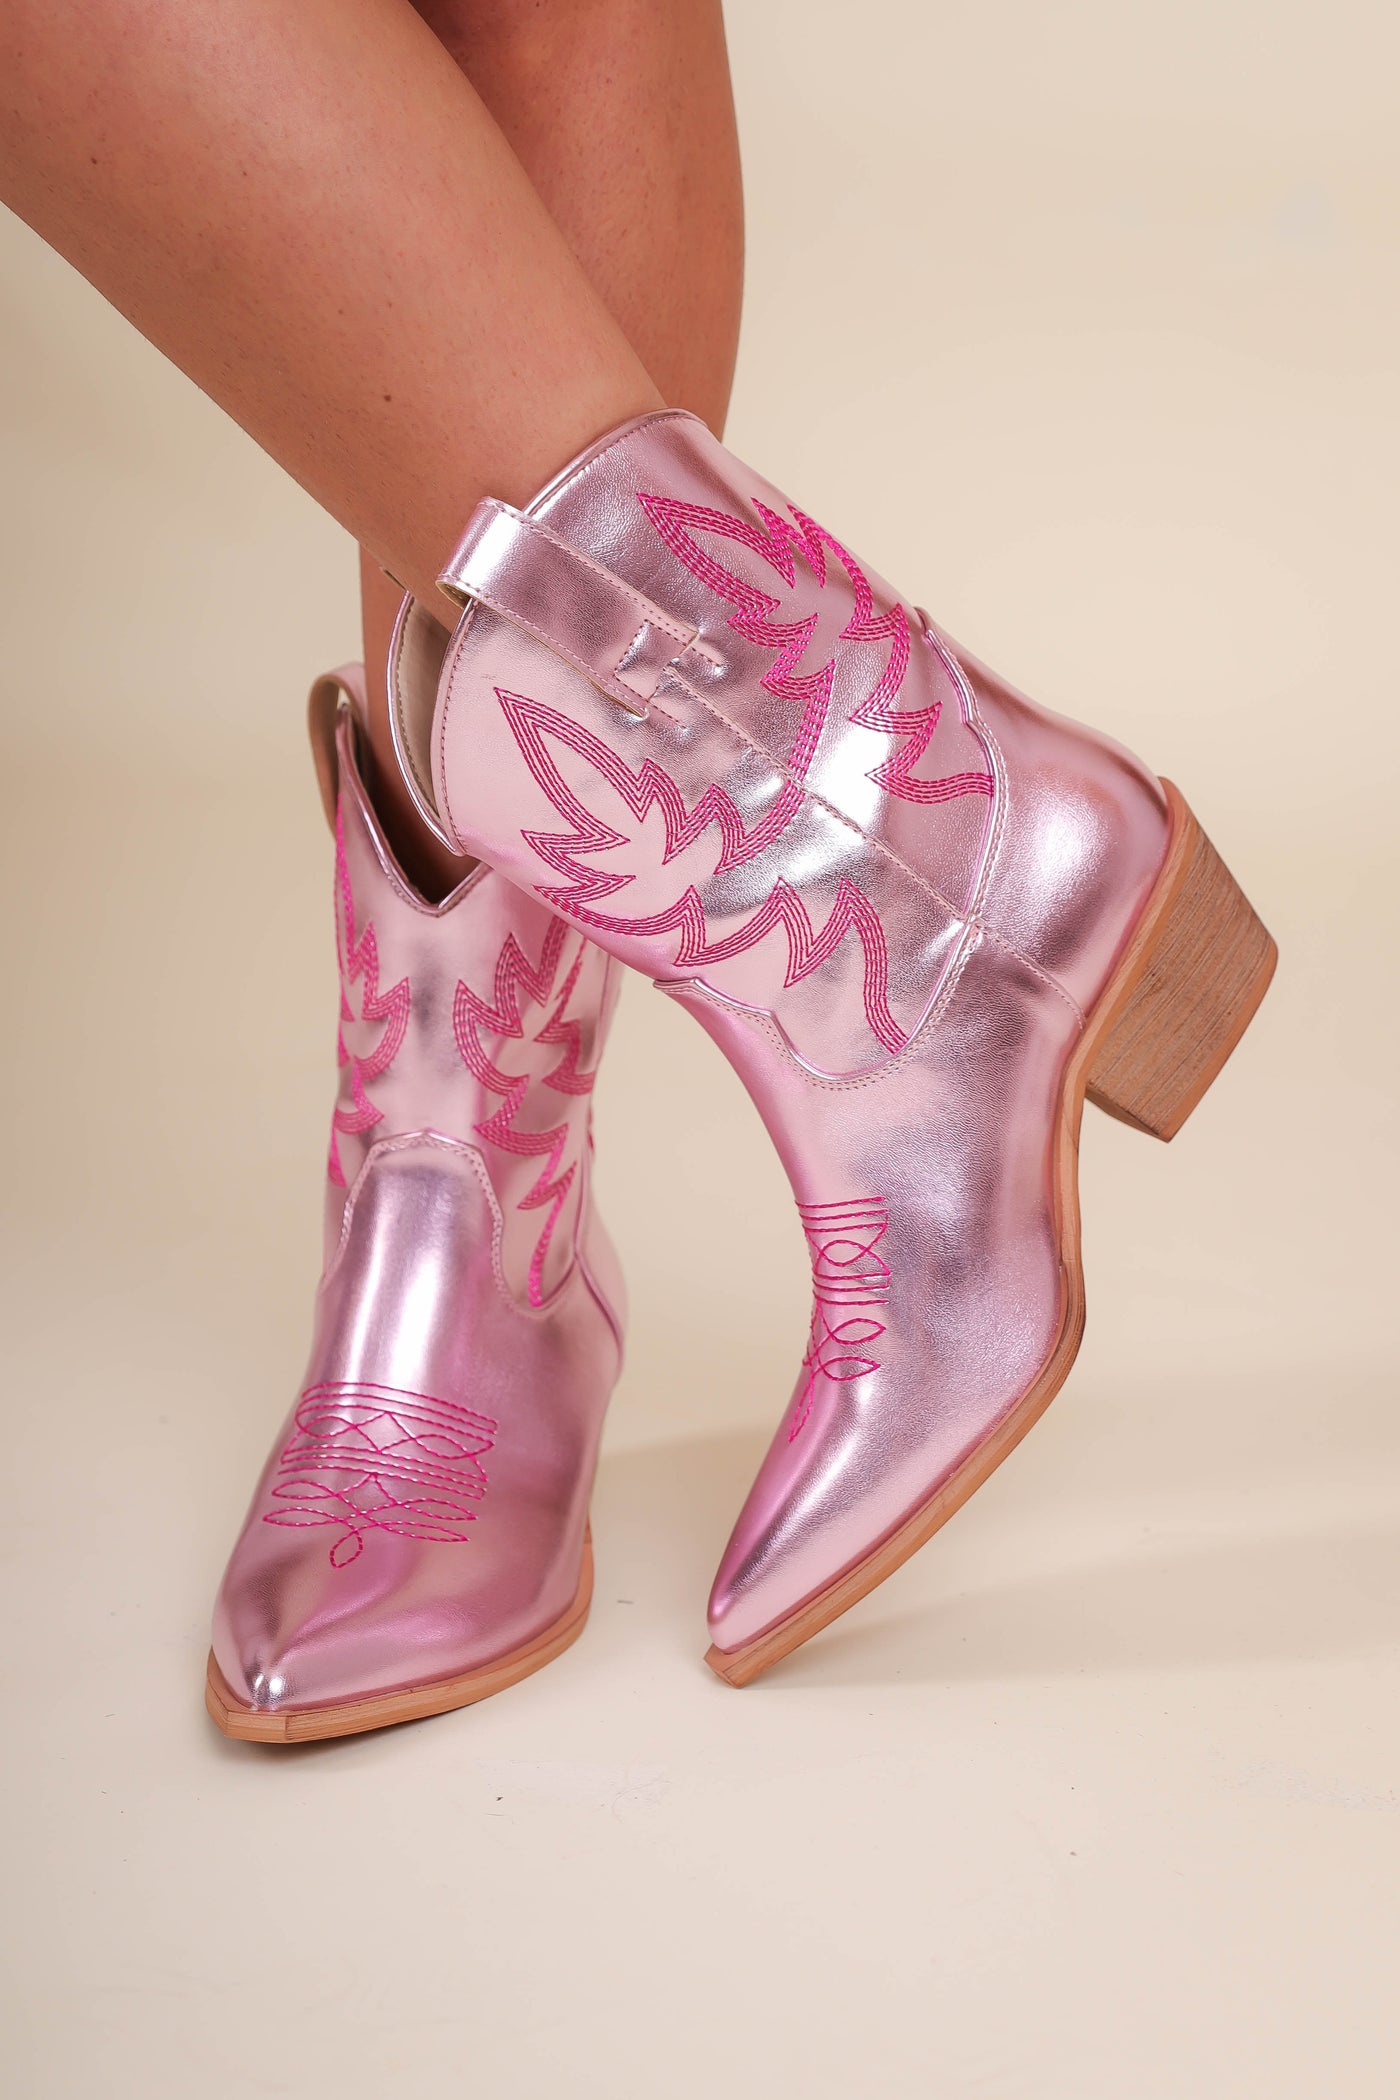 Women's Pink Western Boots- Pink Metallic Boots- Fun Pink Western Style Boots